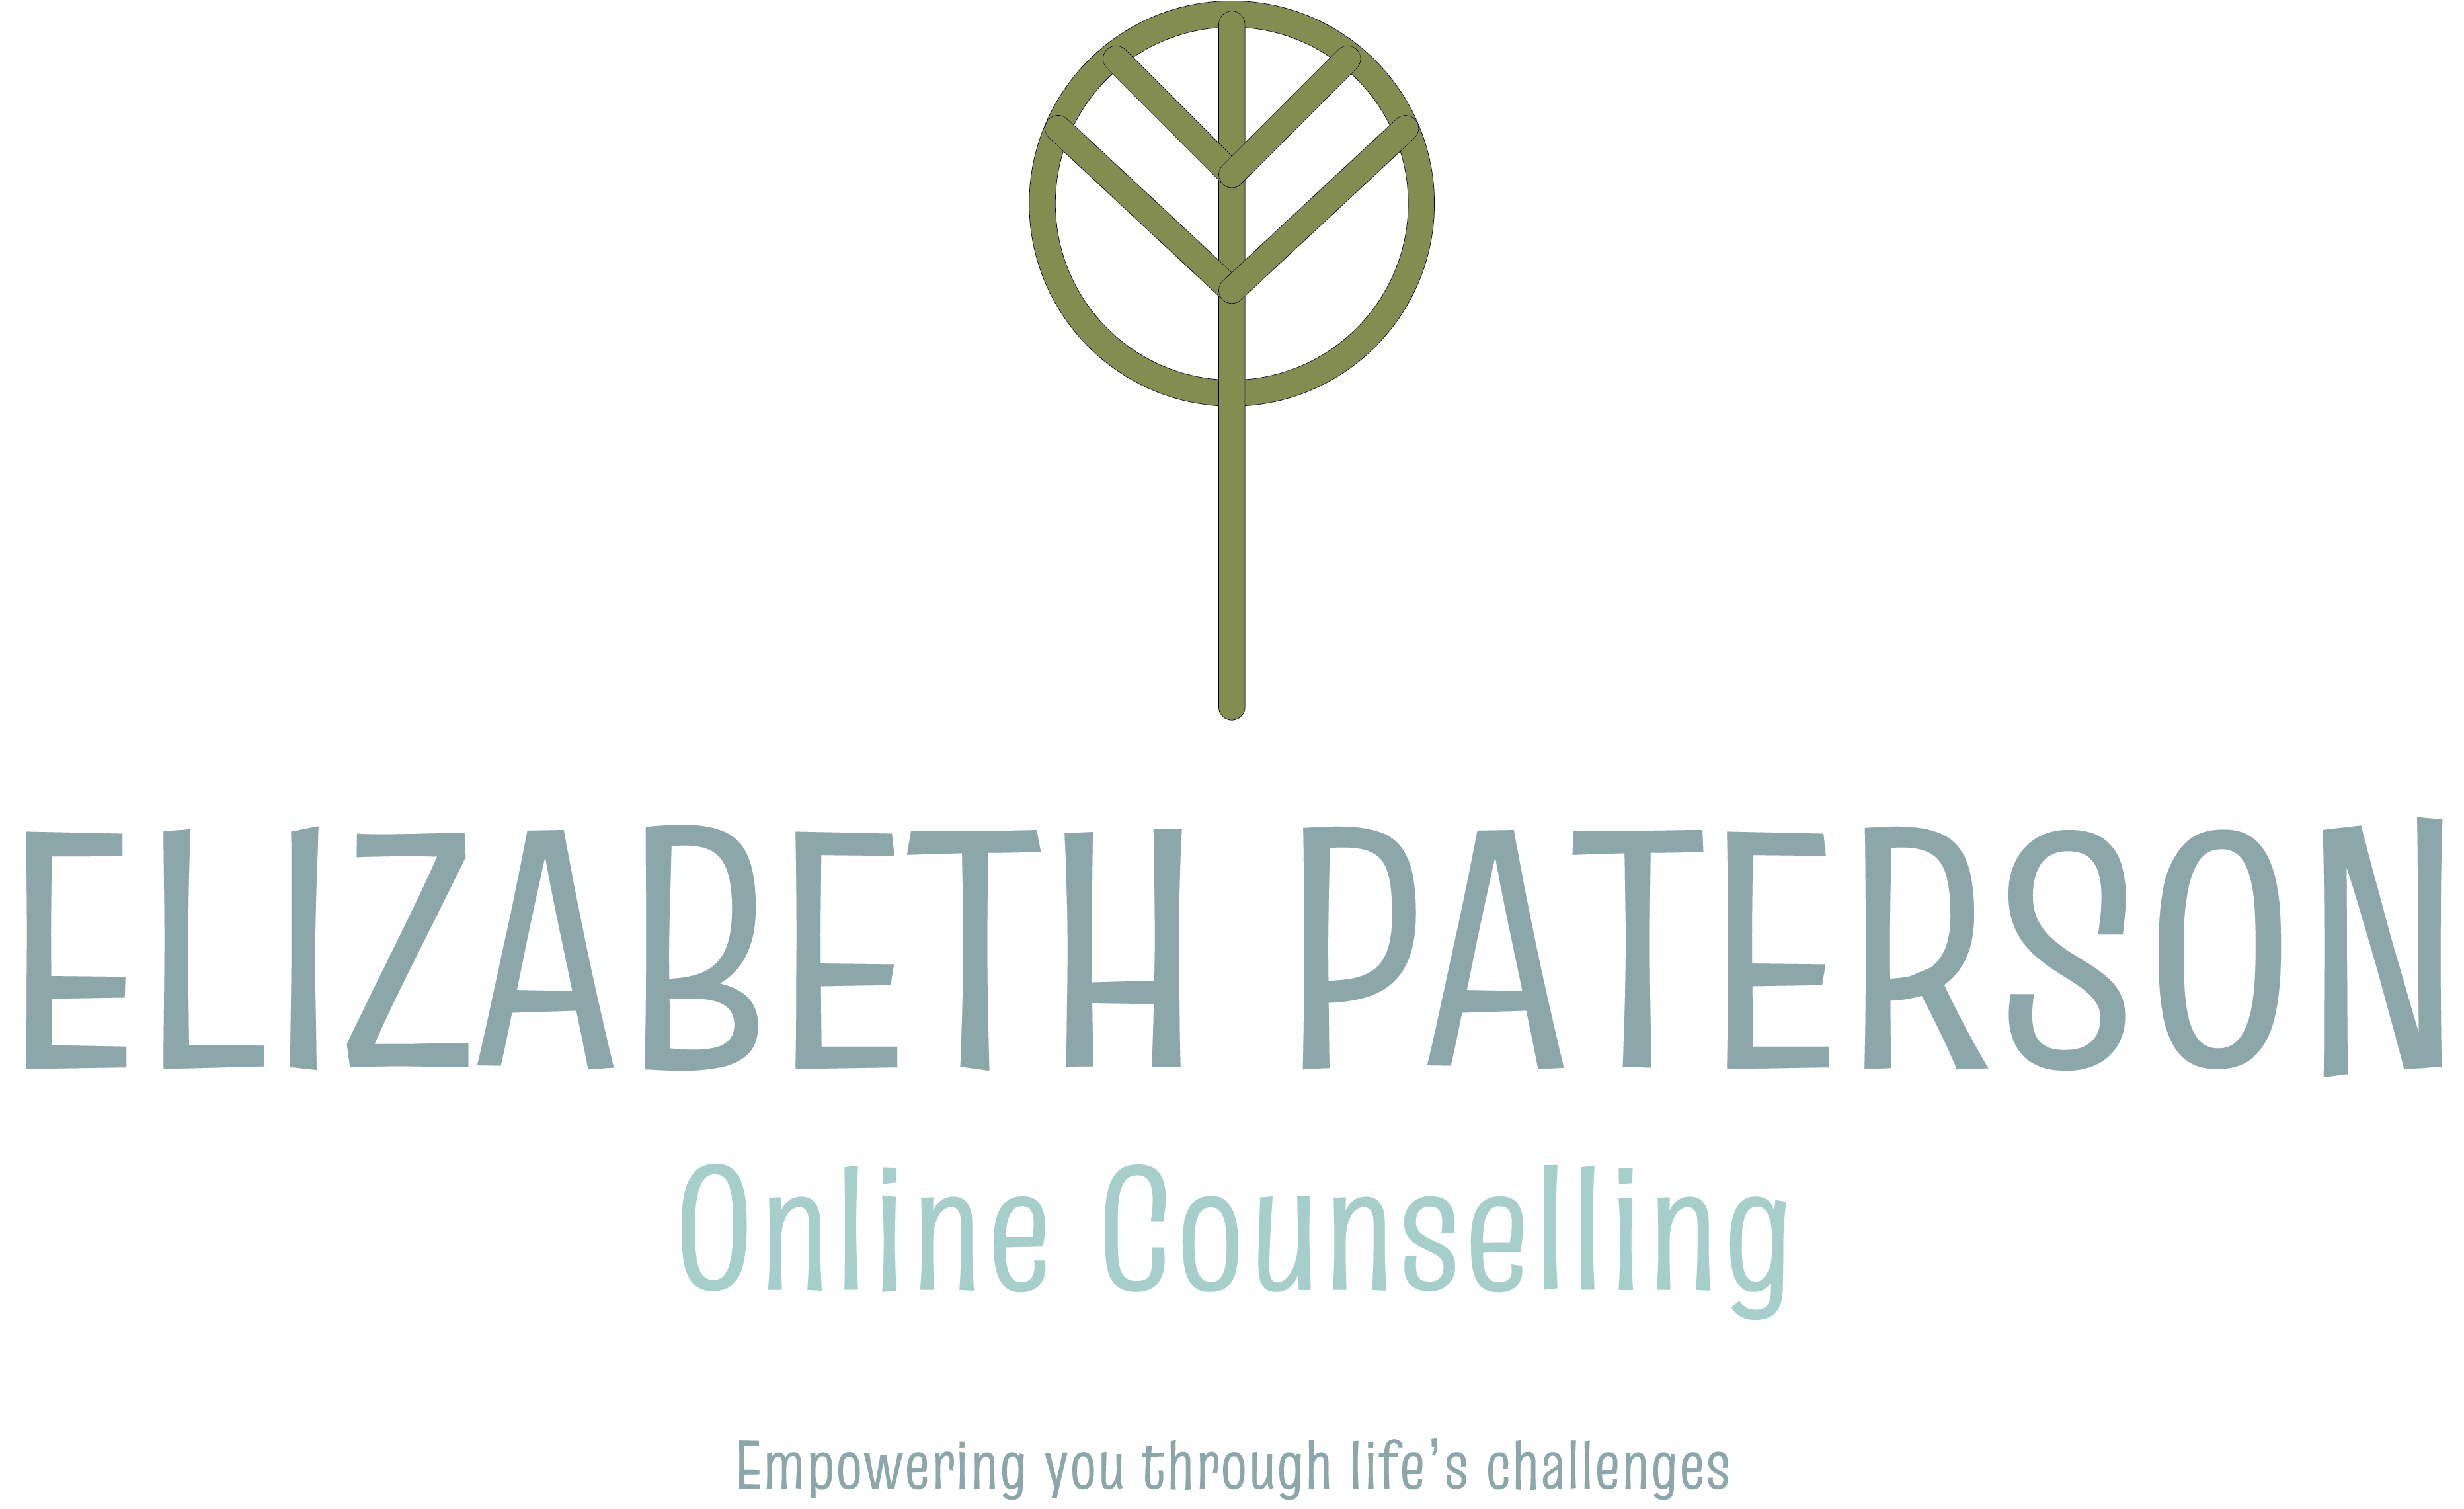 Elizabeth Paterson Online Counselling